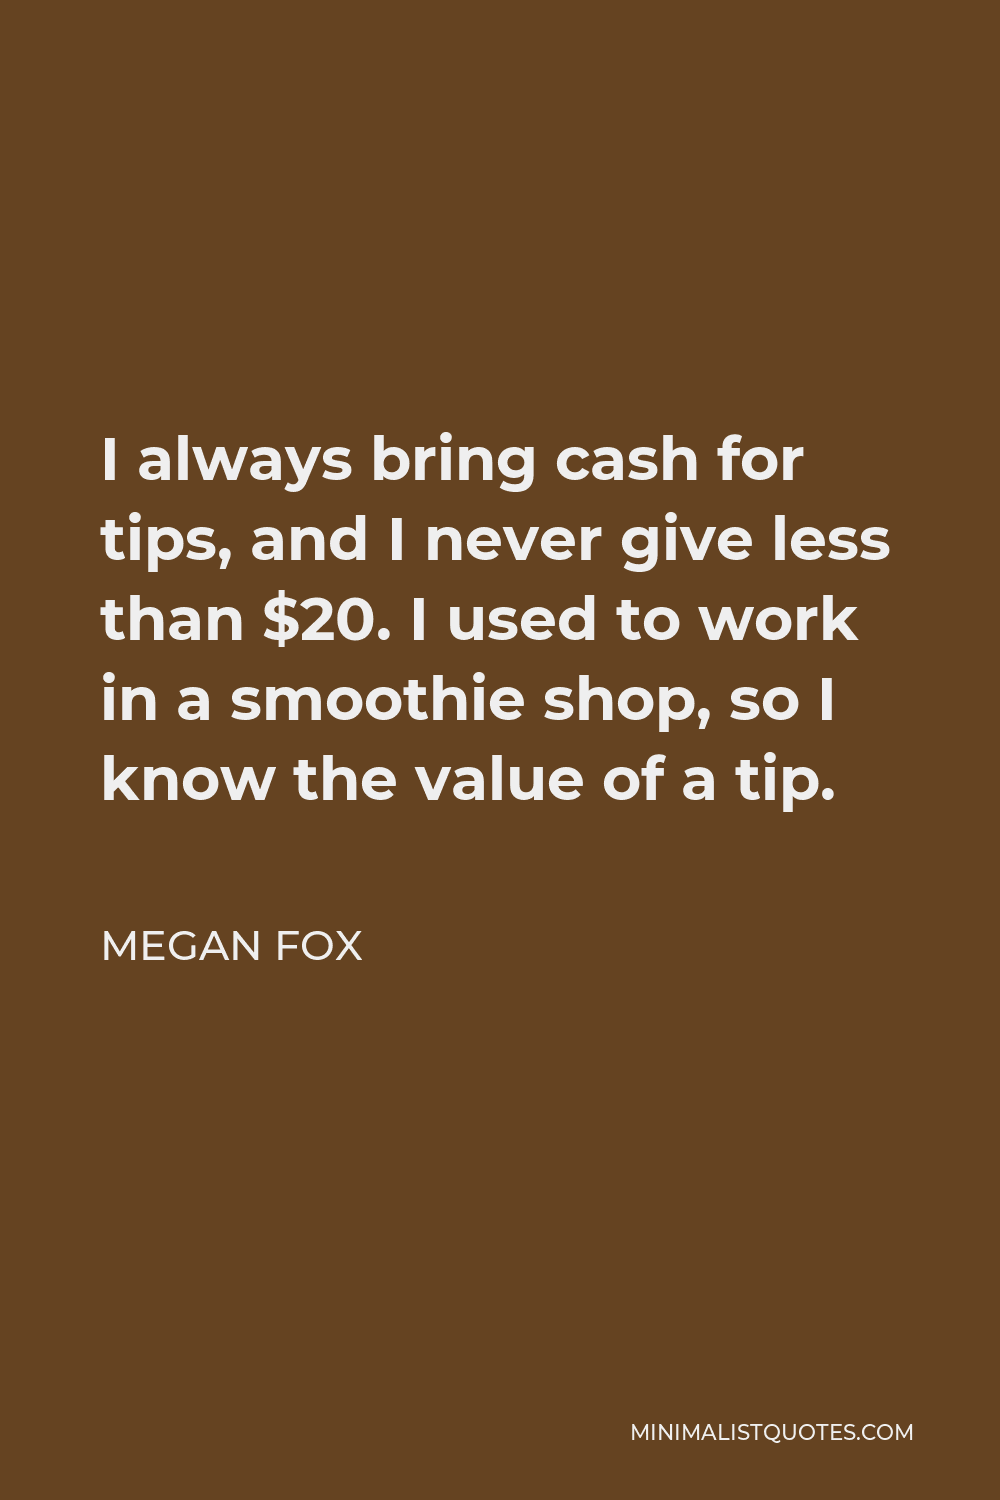 Megan Fox Quote - I always bring cash for tips, and I never give less than $20. I used to work in a smoothie shop, so I know the value of a tip.